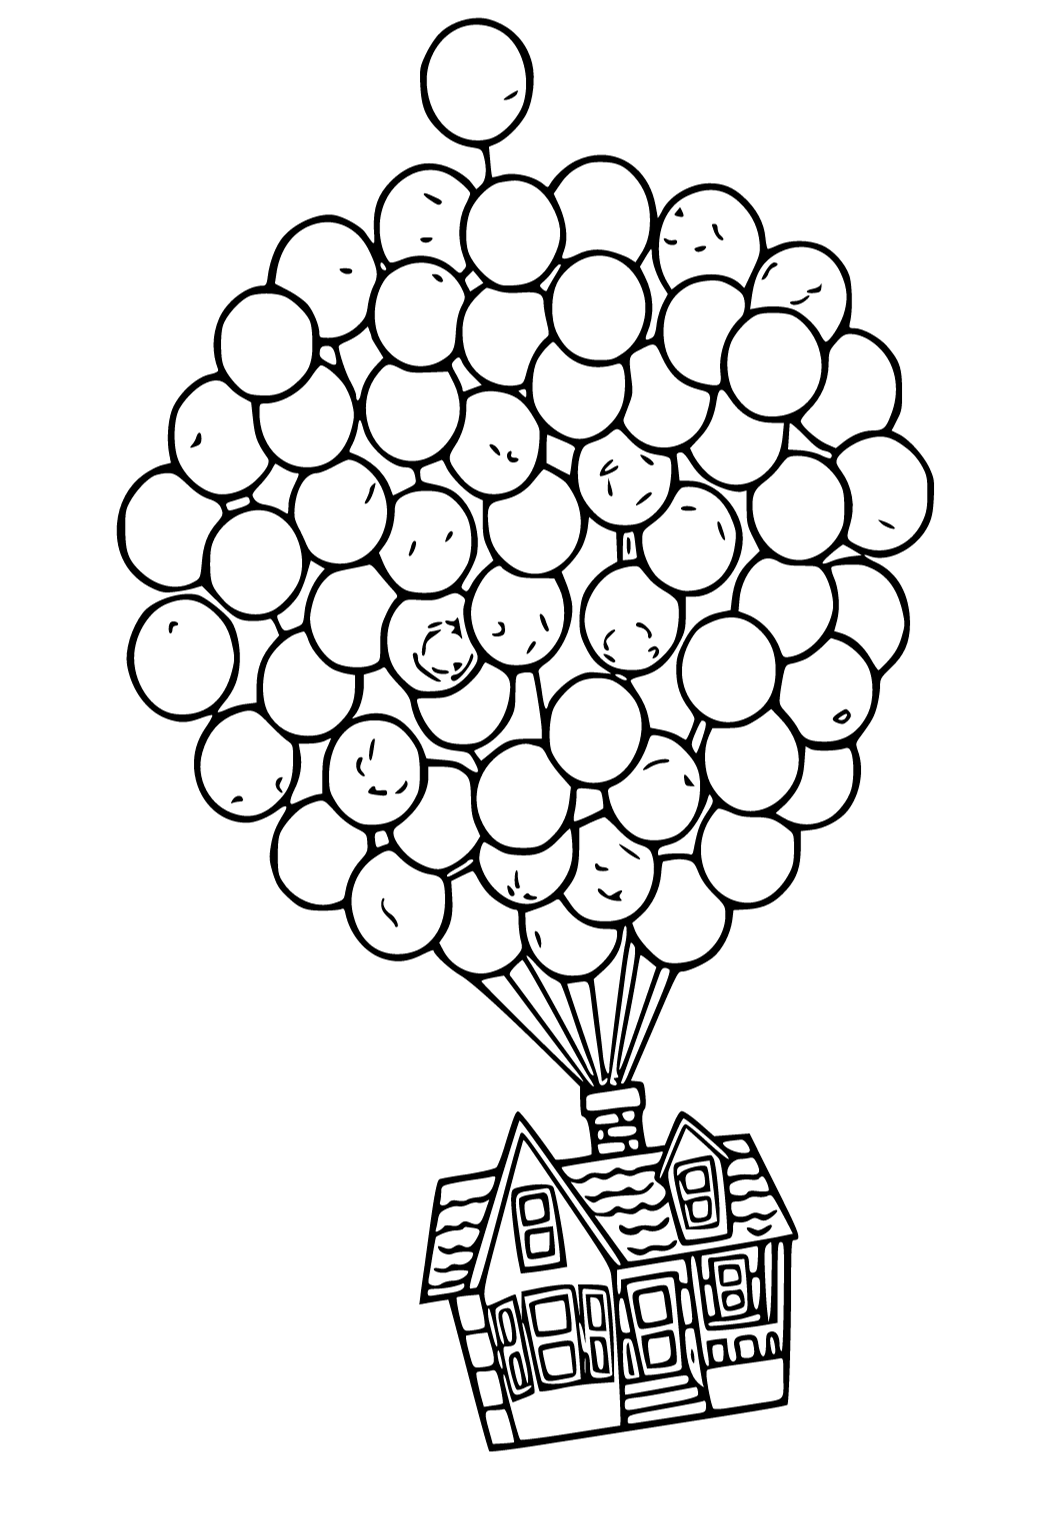 Free printable up house coloring page for adults and kids